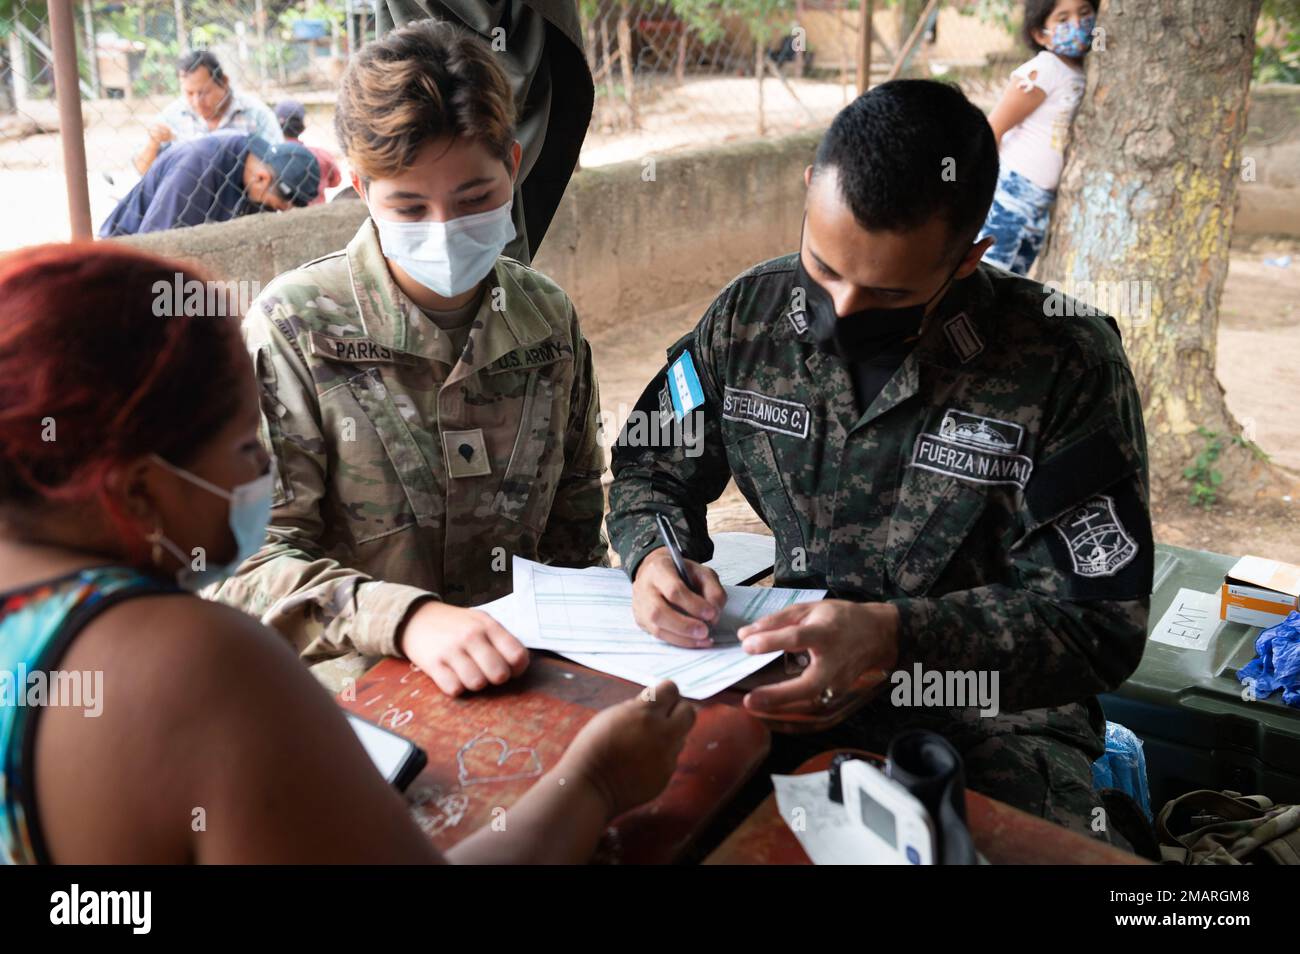 A U.S. Army soldier works side by side with a Honduran Navy captain during a global health engagement at Las Mesas, department of Comayagua, June 3, 2022. As part of the U.S. Southern Command’s enduring partnership to Central America, Joint Task Force-Bravo executed a three-day Global Health Engagement in Comayagua, Honduras, June 1-3, working side by side with local military and Ministry of Health personnel. Stock Photo